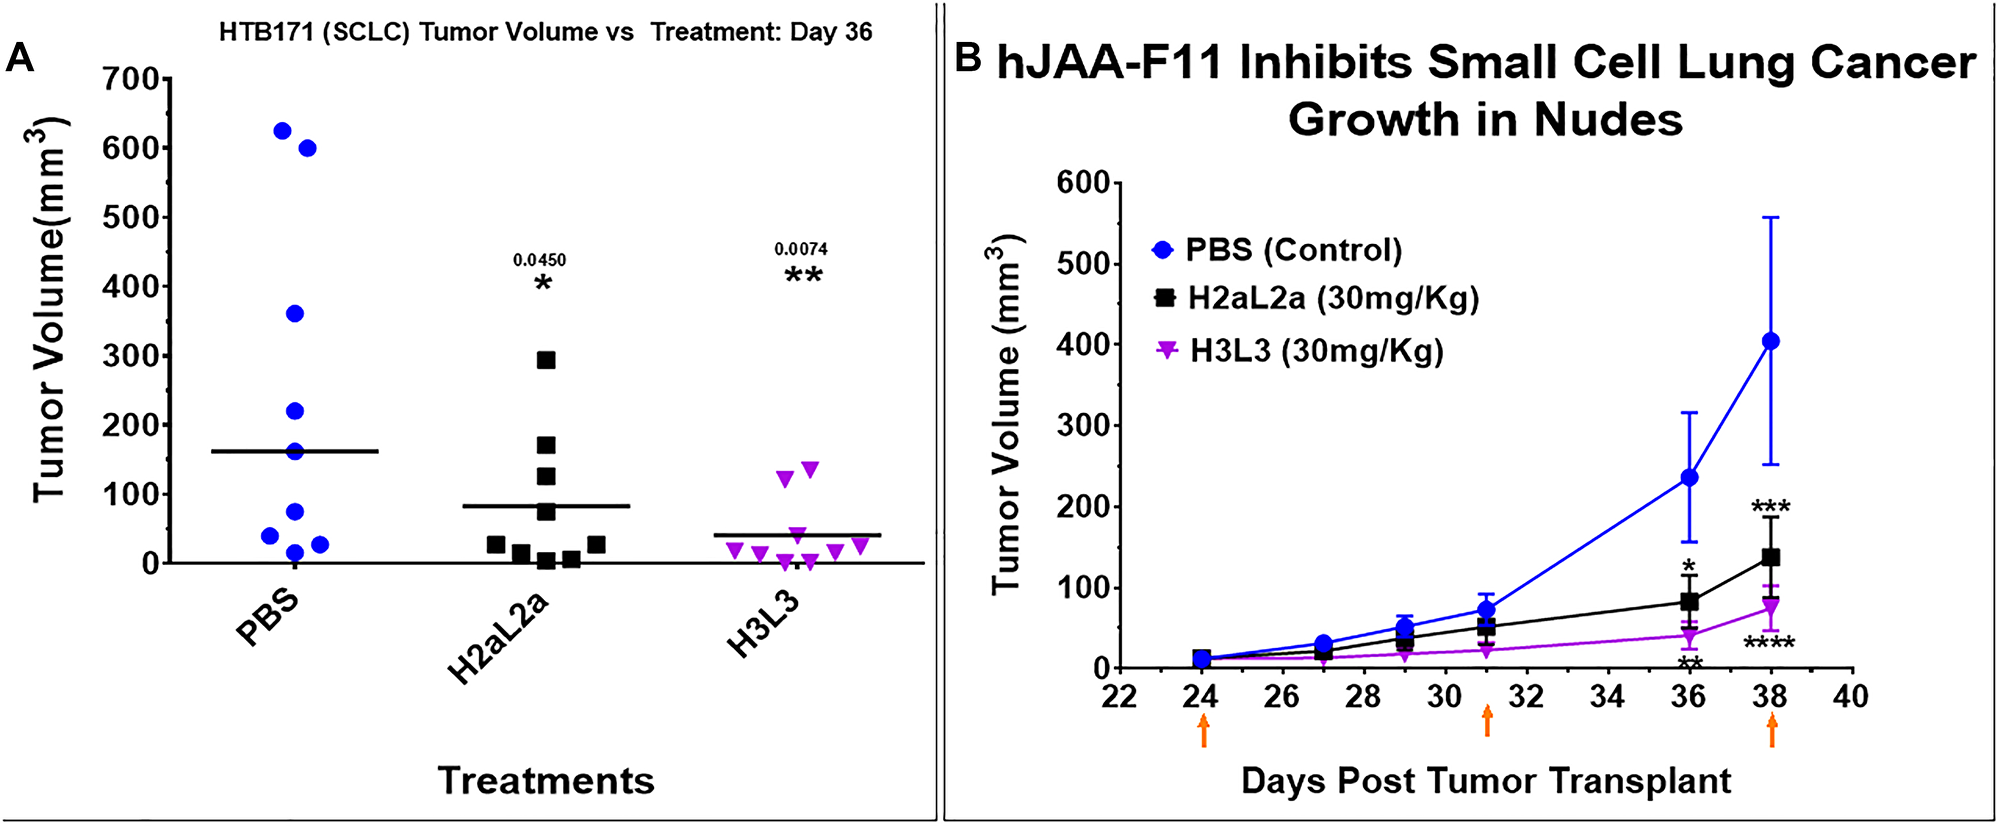 Efficacy of hJAA-F11- H2aL2a and - H3L3 in HTB171 human small cell lung cancer (SCLC) in nude mouse xenograft model.